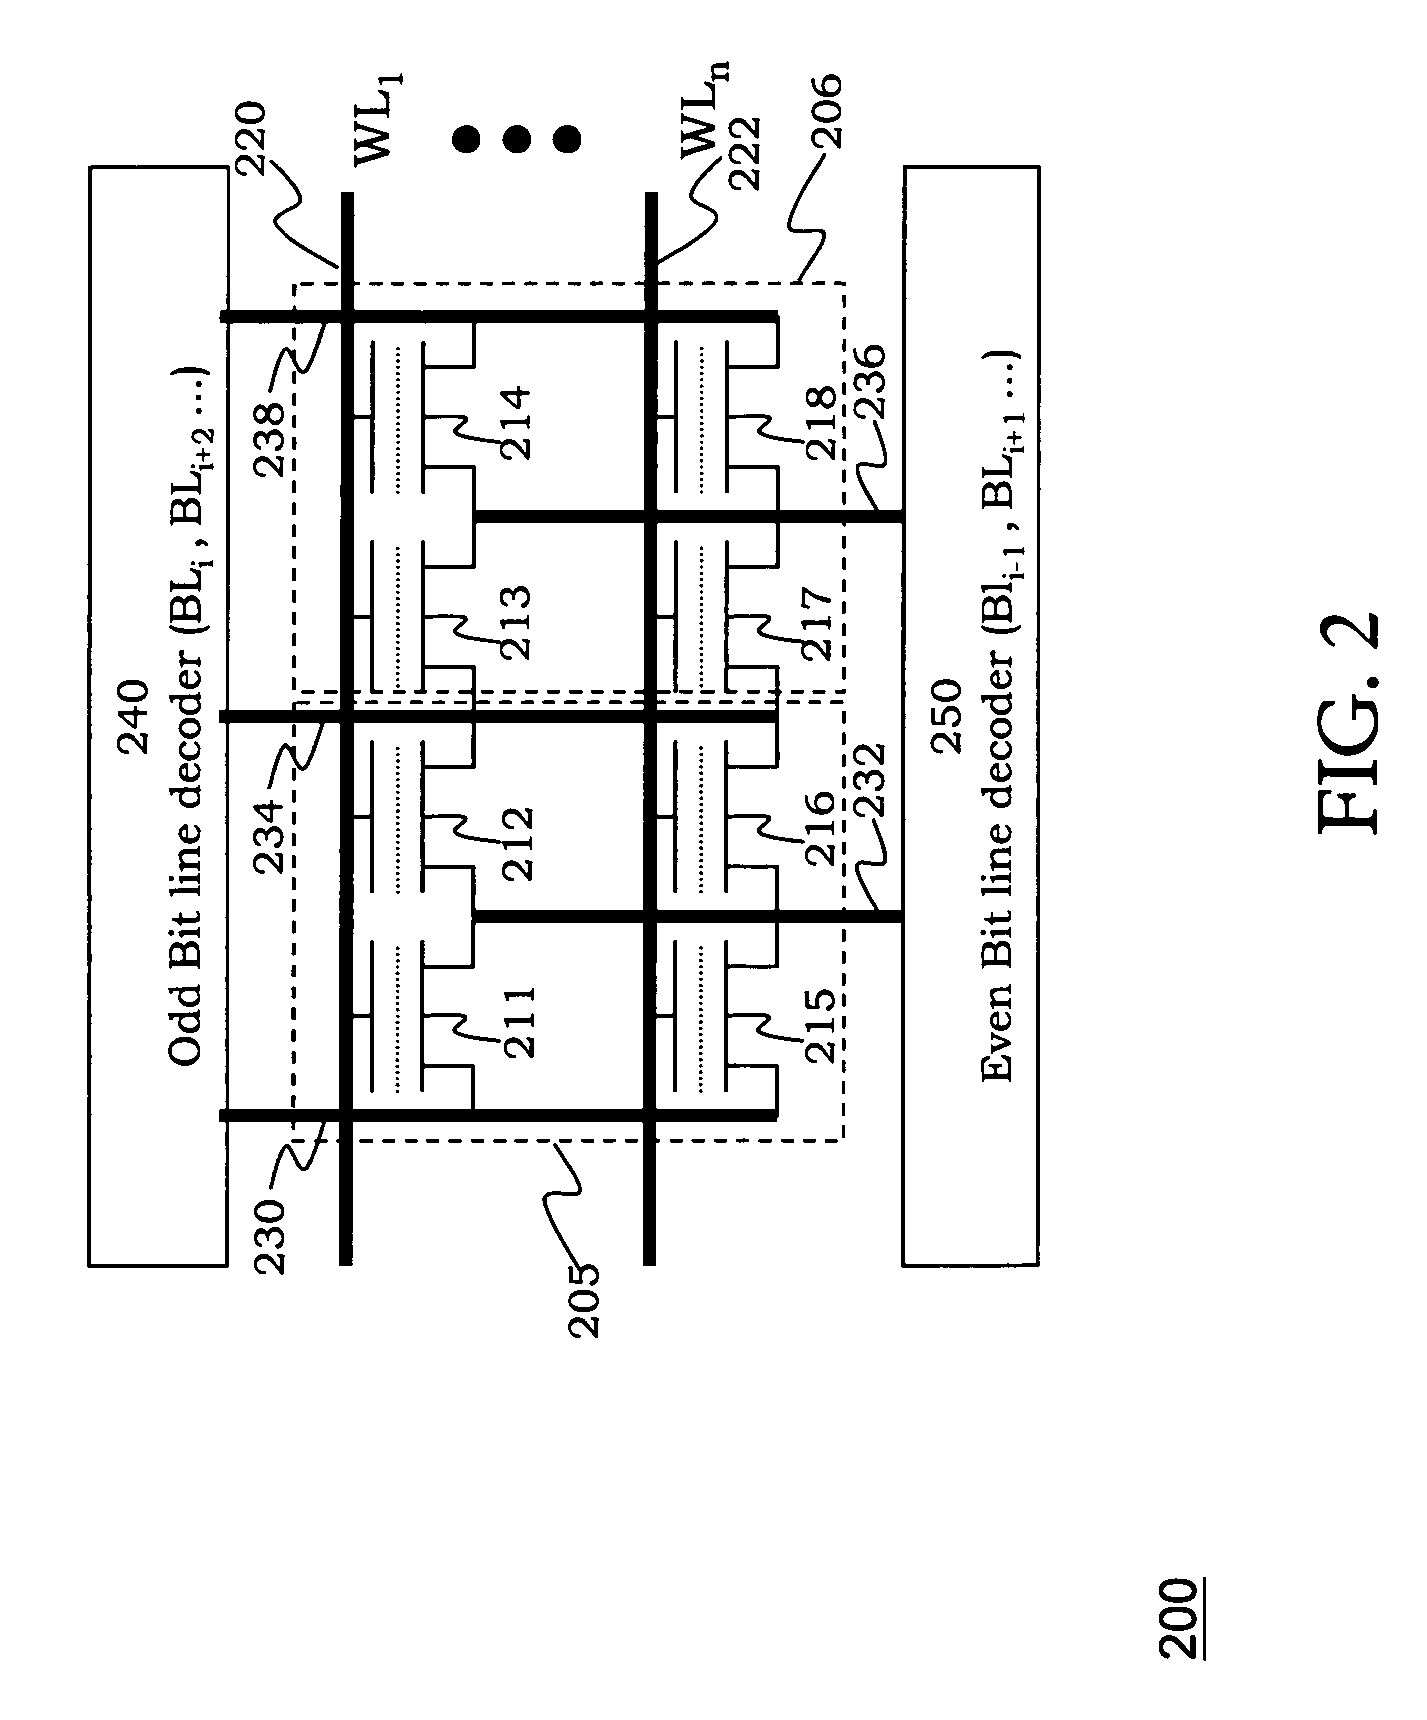 Hole annealing methods of non-volatile memory cells